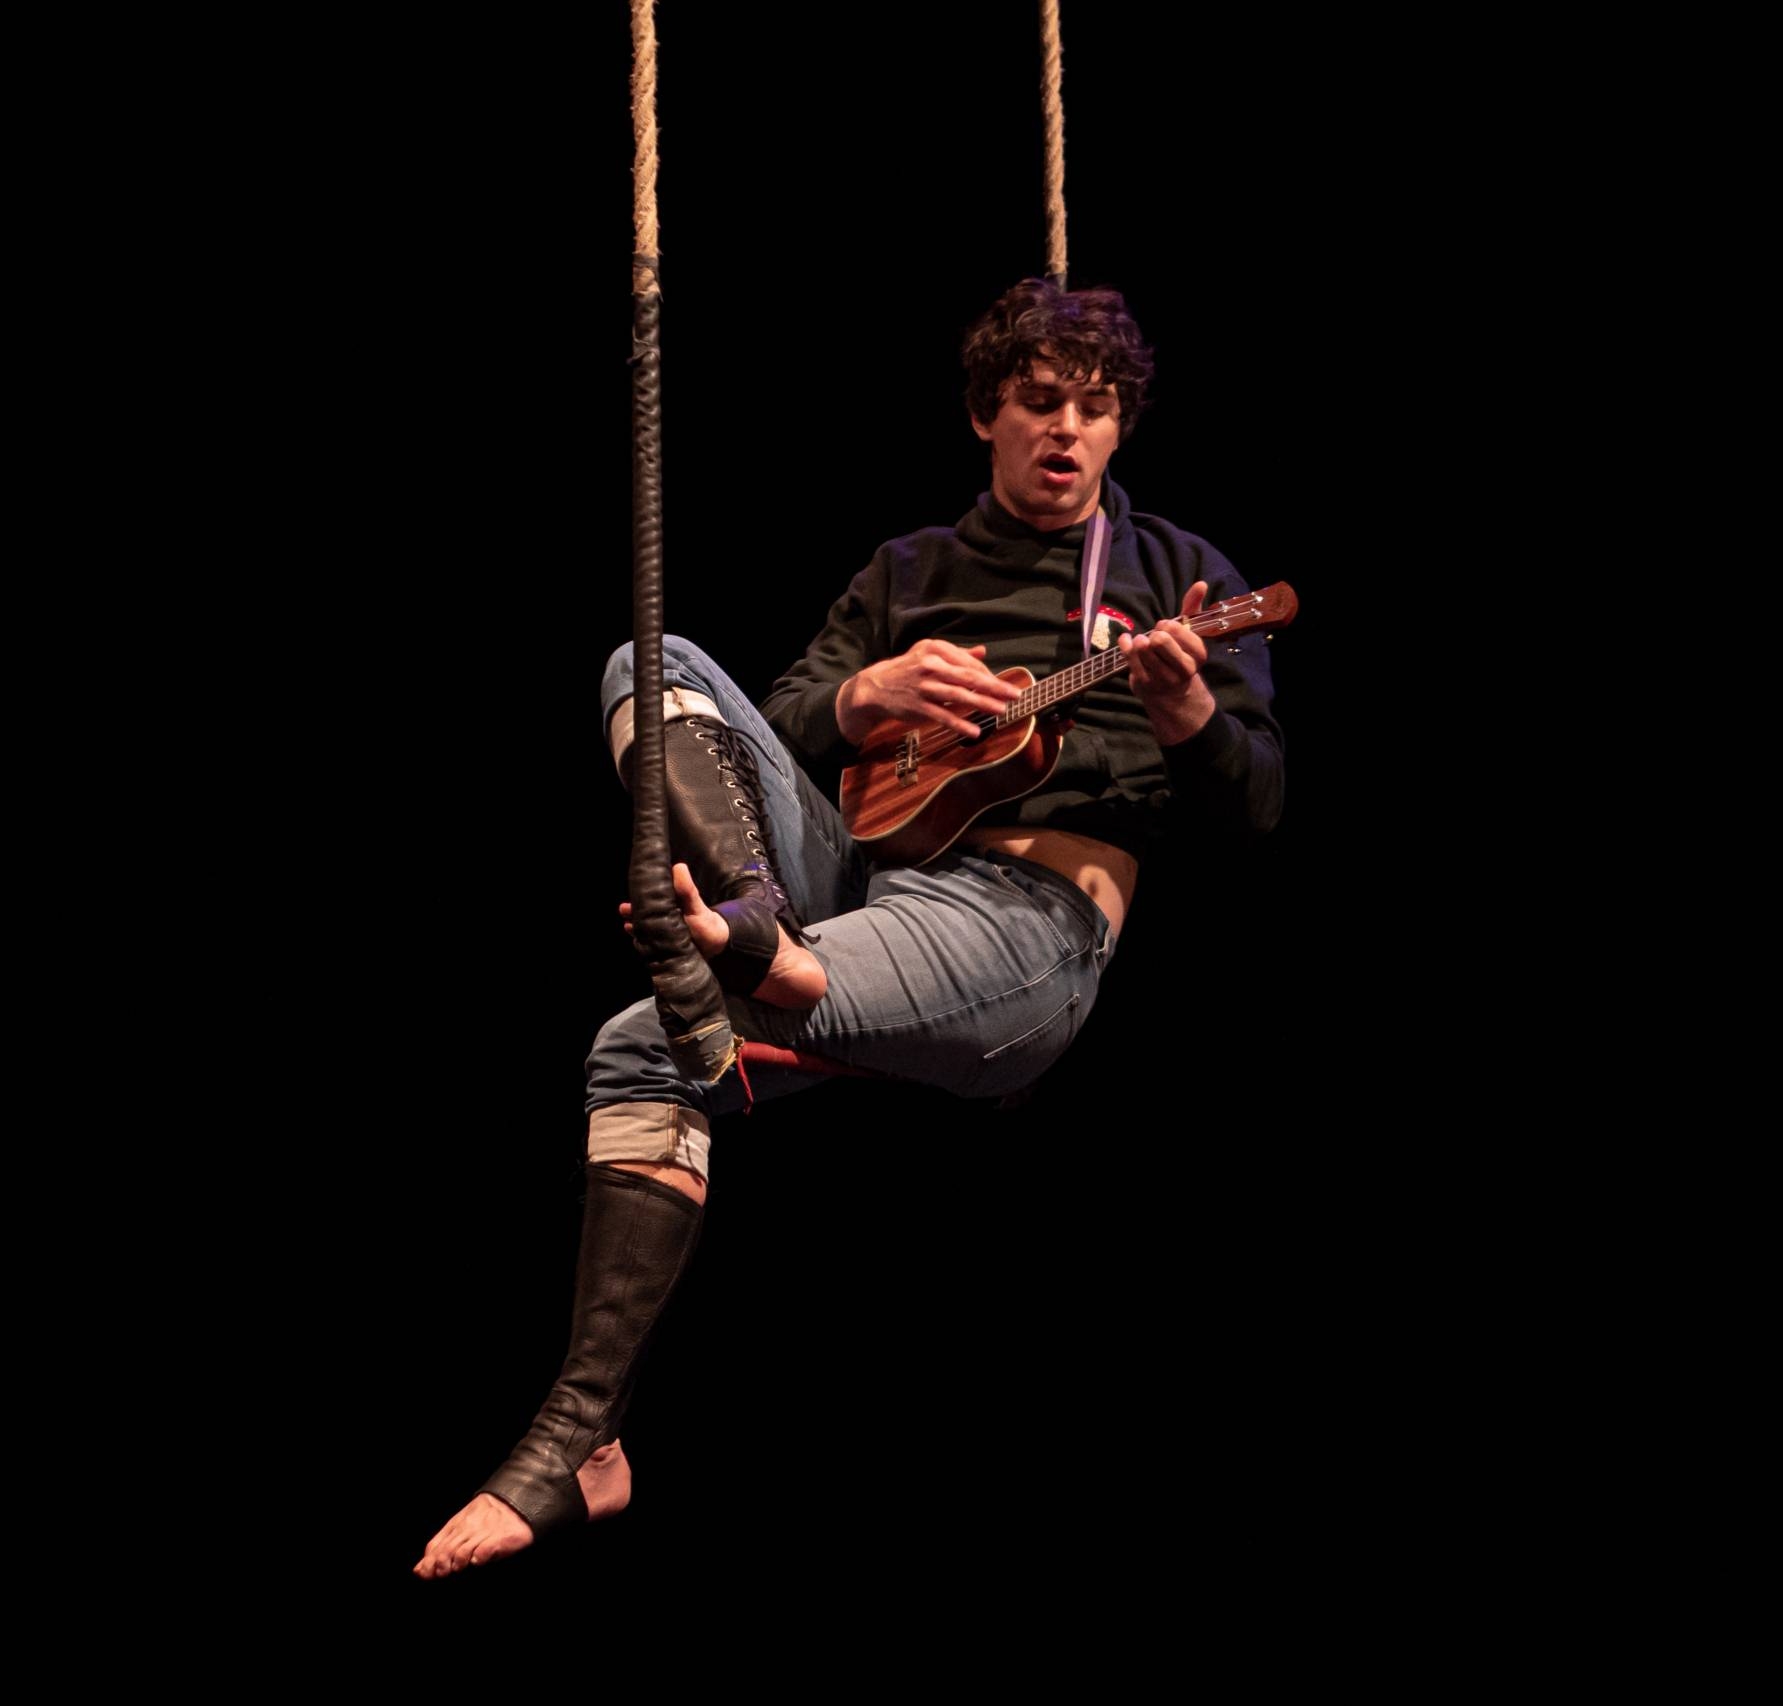 A man with a ukulele sits on a trapeze high against a black background